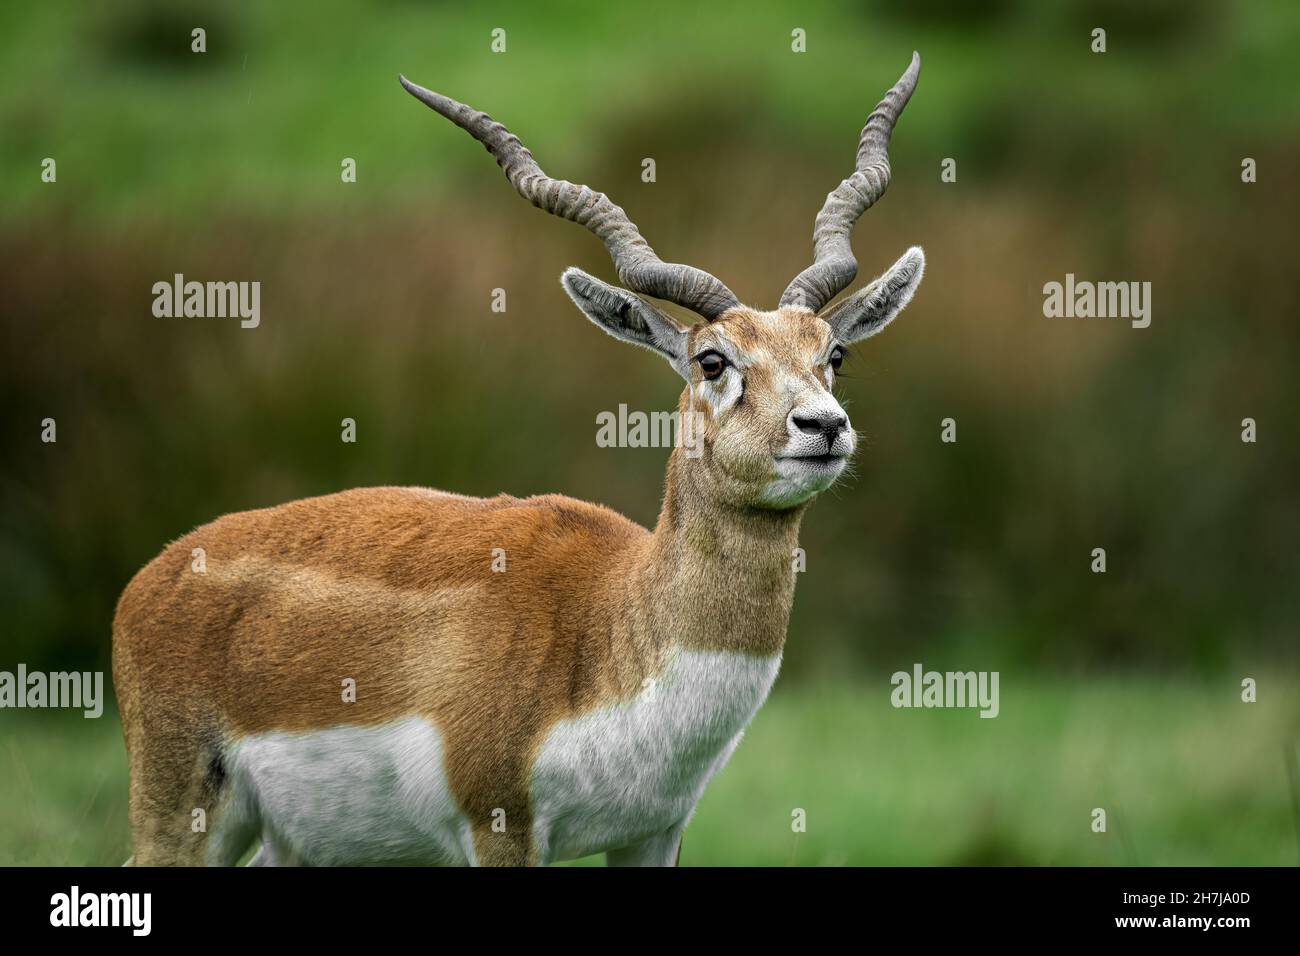 three quarter length portrait of a blackbuck antelope with large twisted antlers Stock Photo